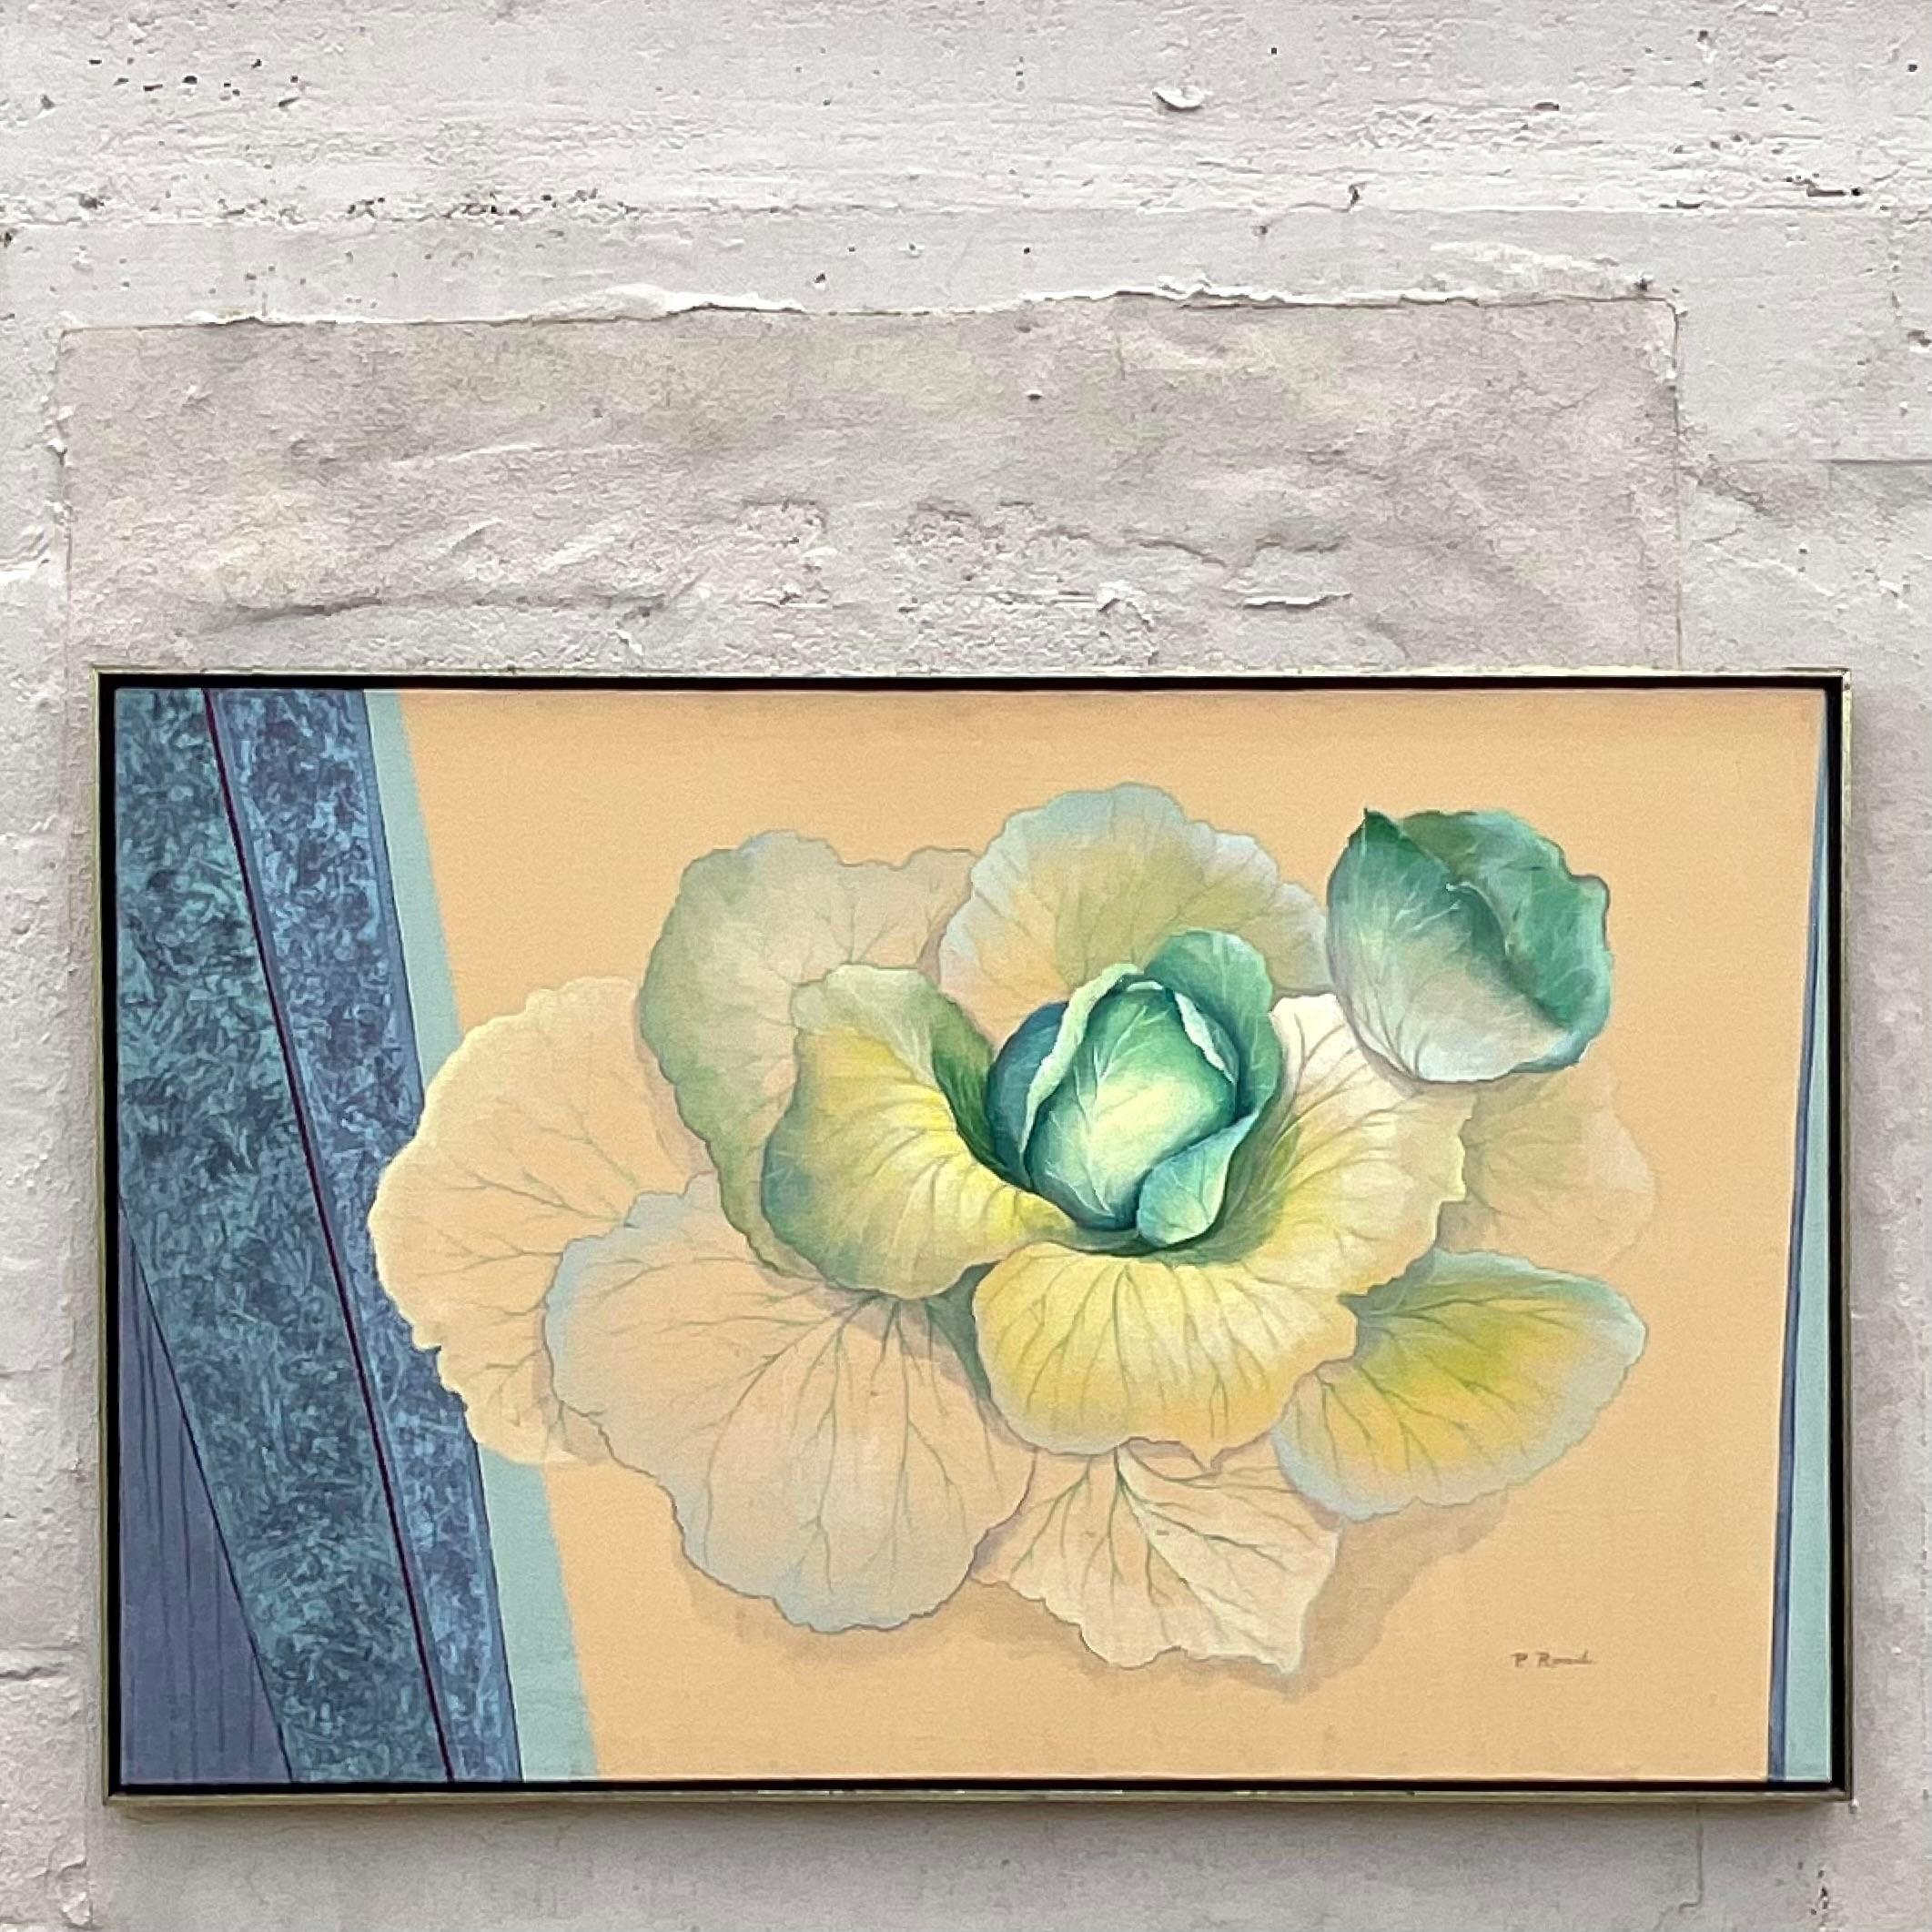 An outstanding vintage Boho original oil on canvas. A chic still life of cabbage with bold geometric stripes. Signed by the artist. Acquired from a Palm Beach estate.